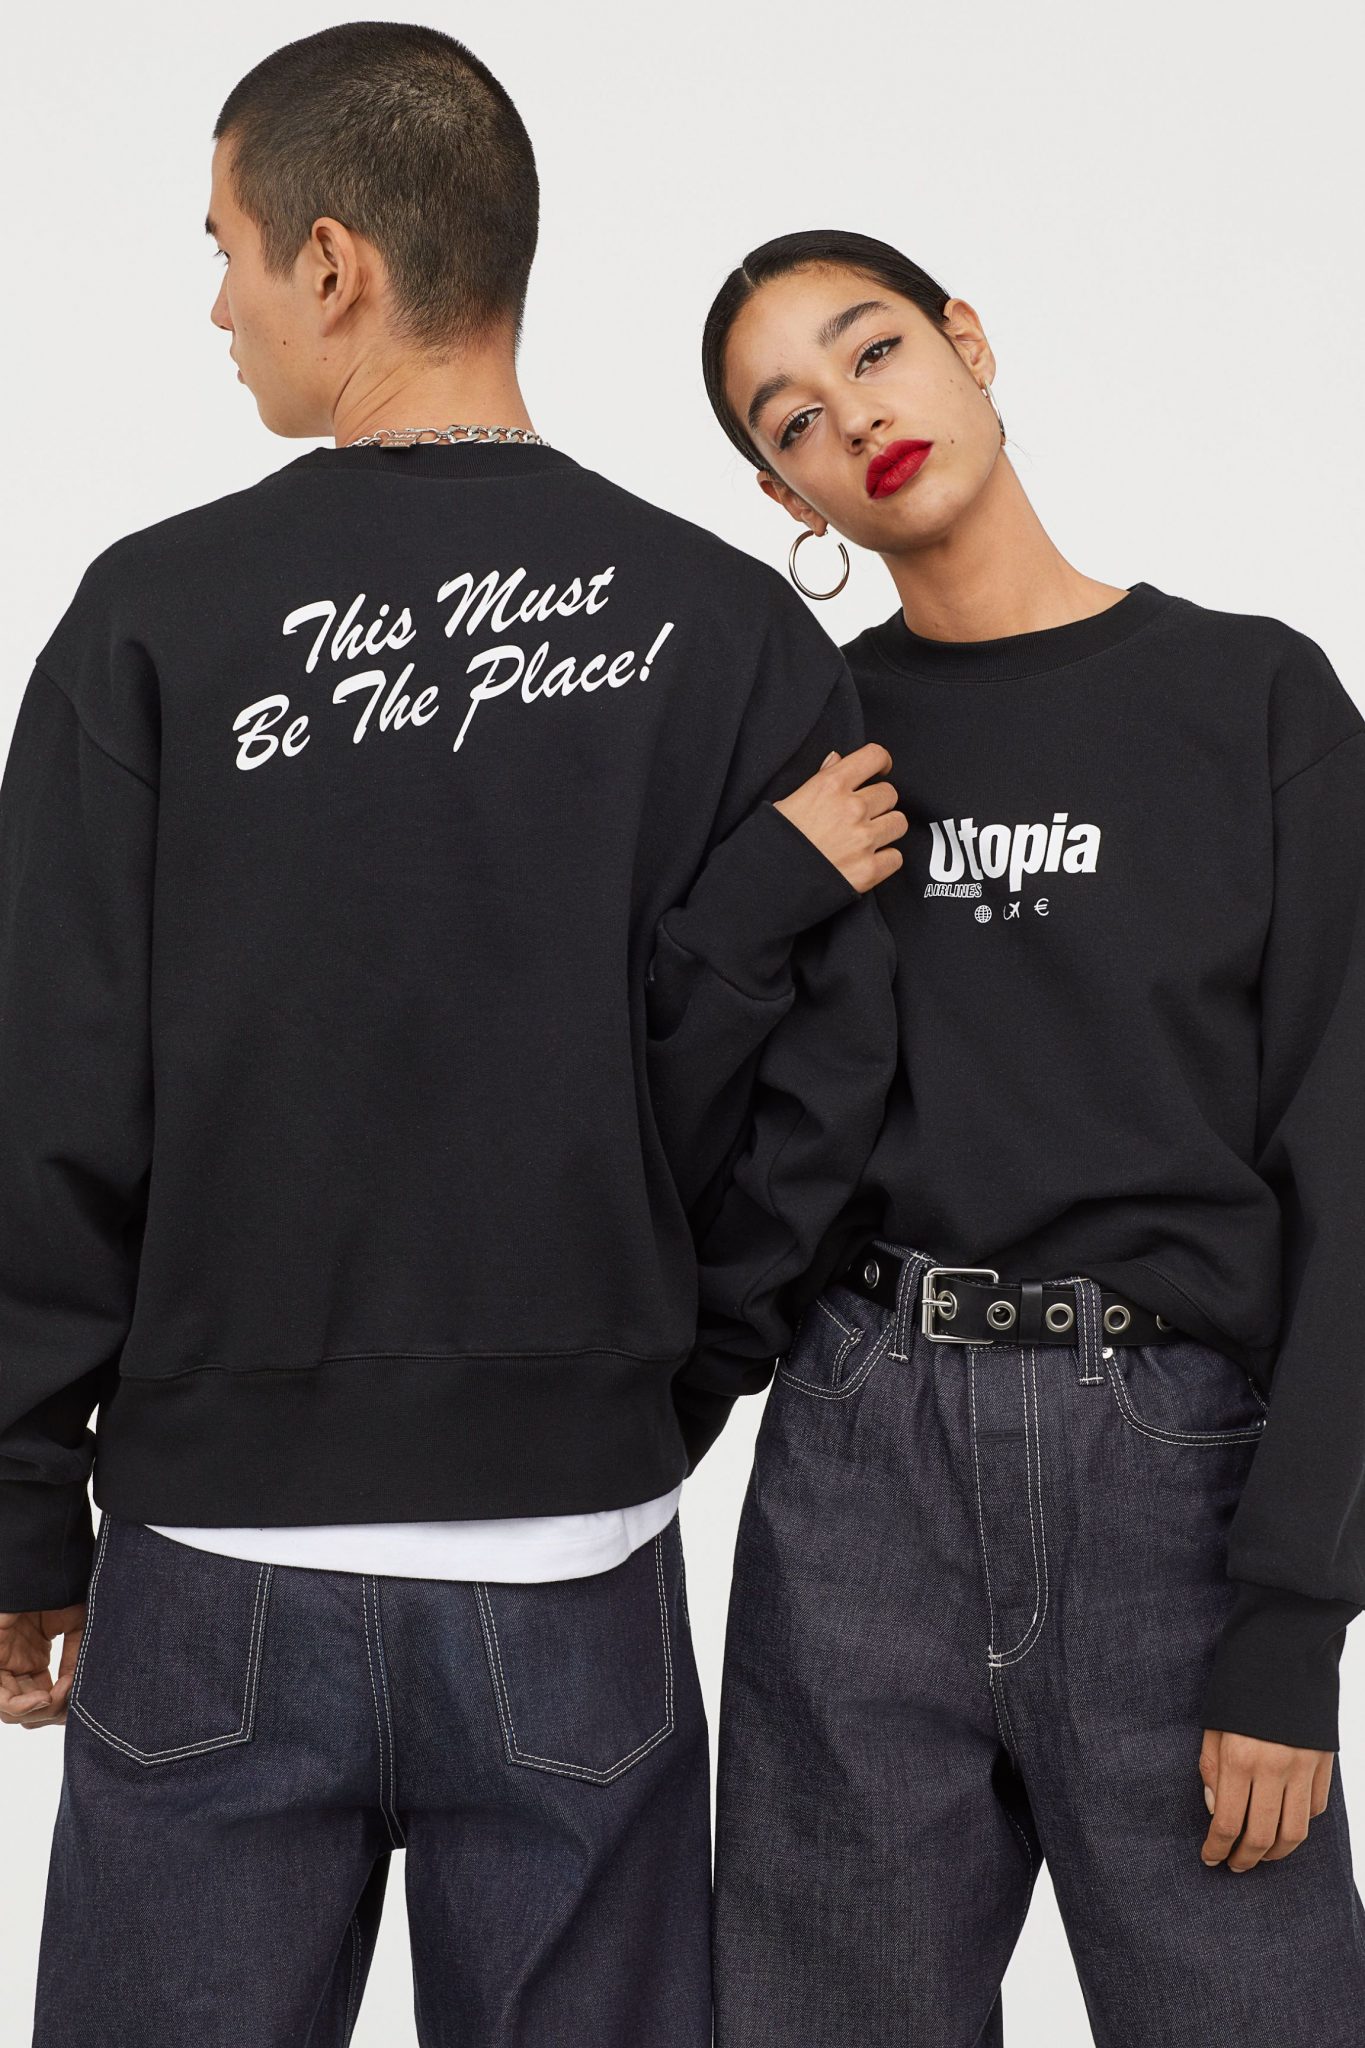 h&m’s new collab might be its coolest yet